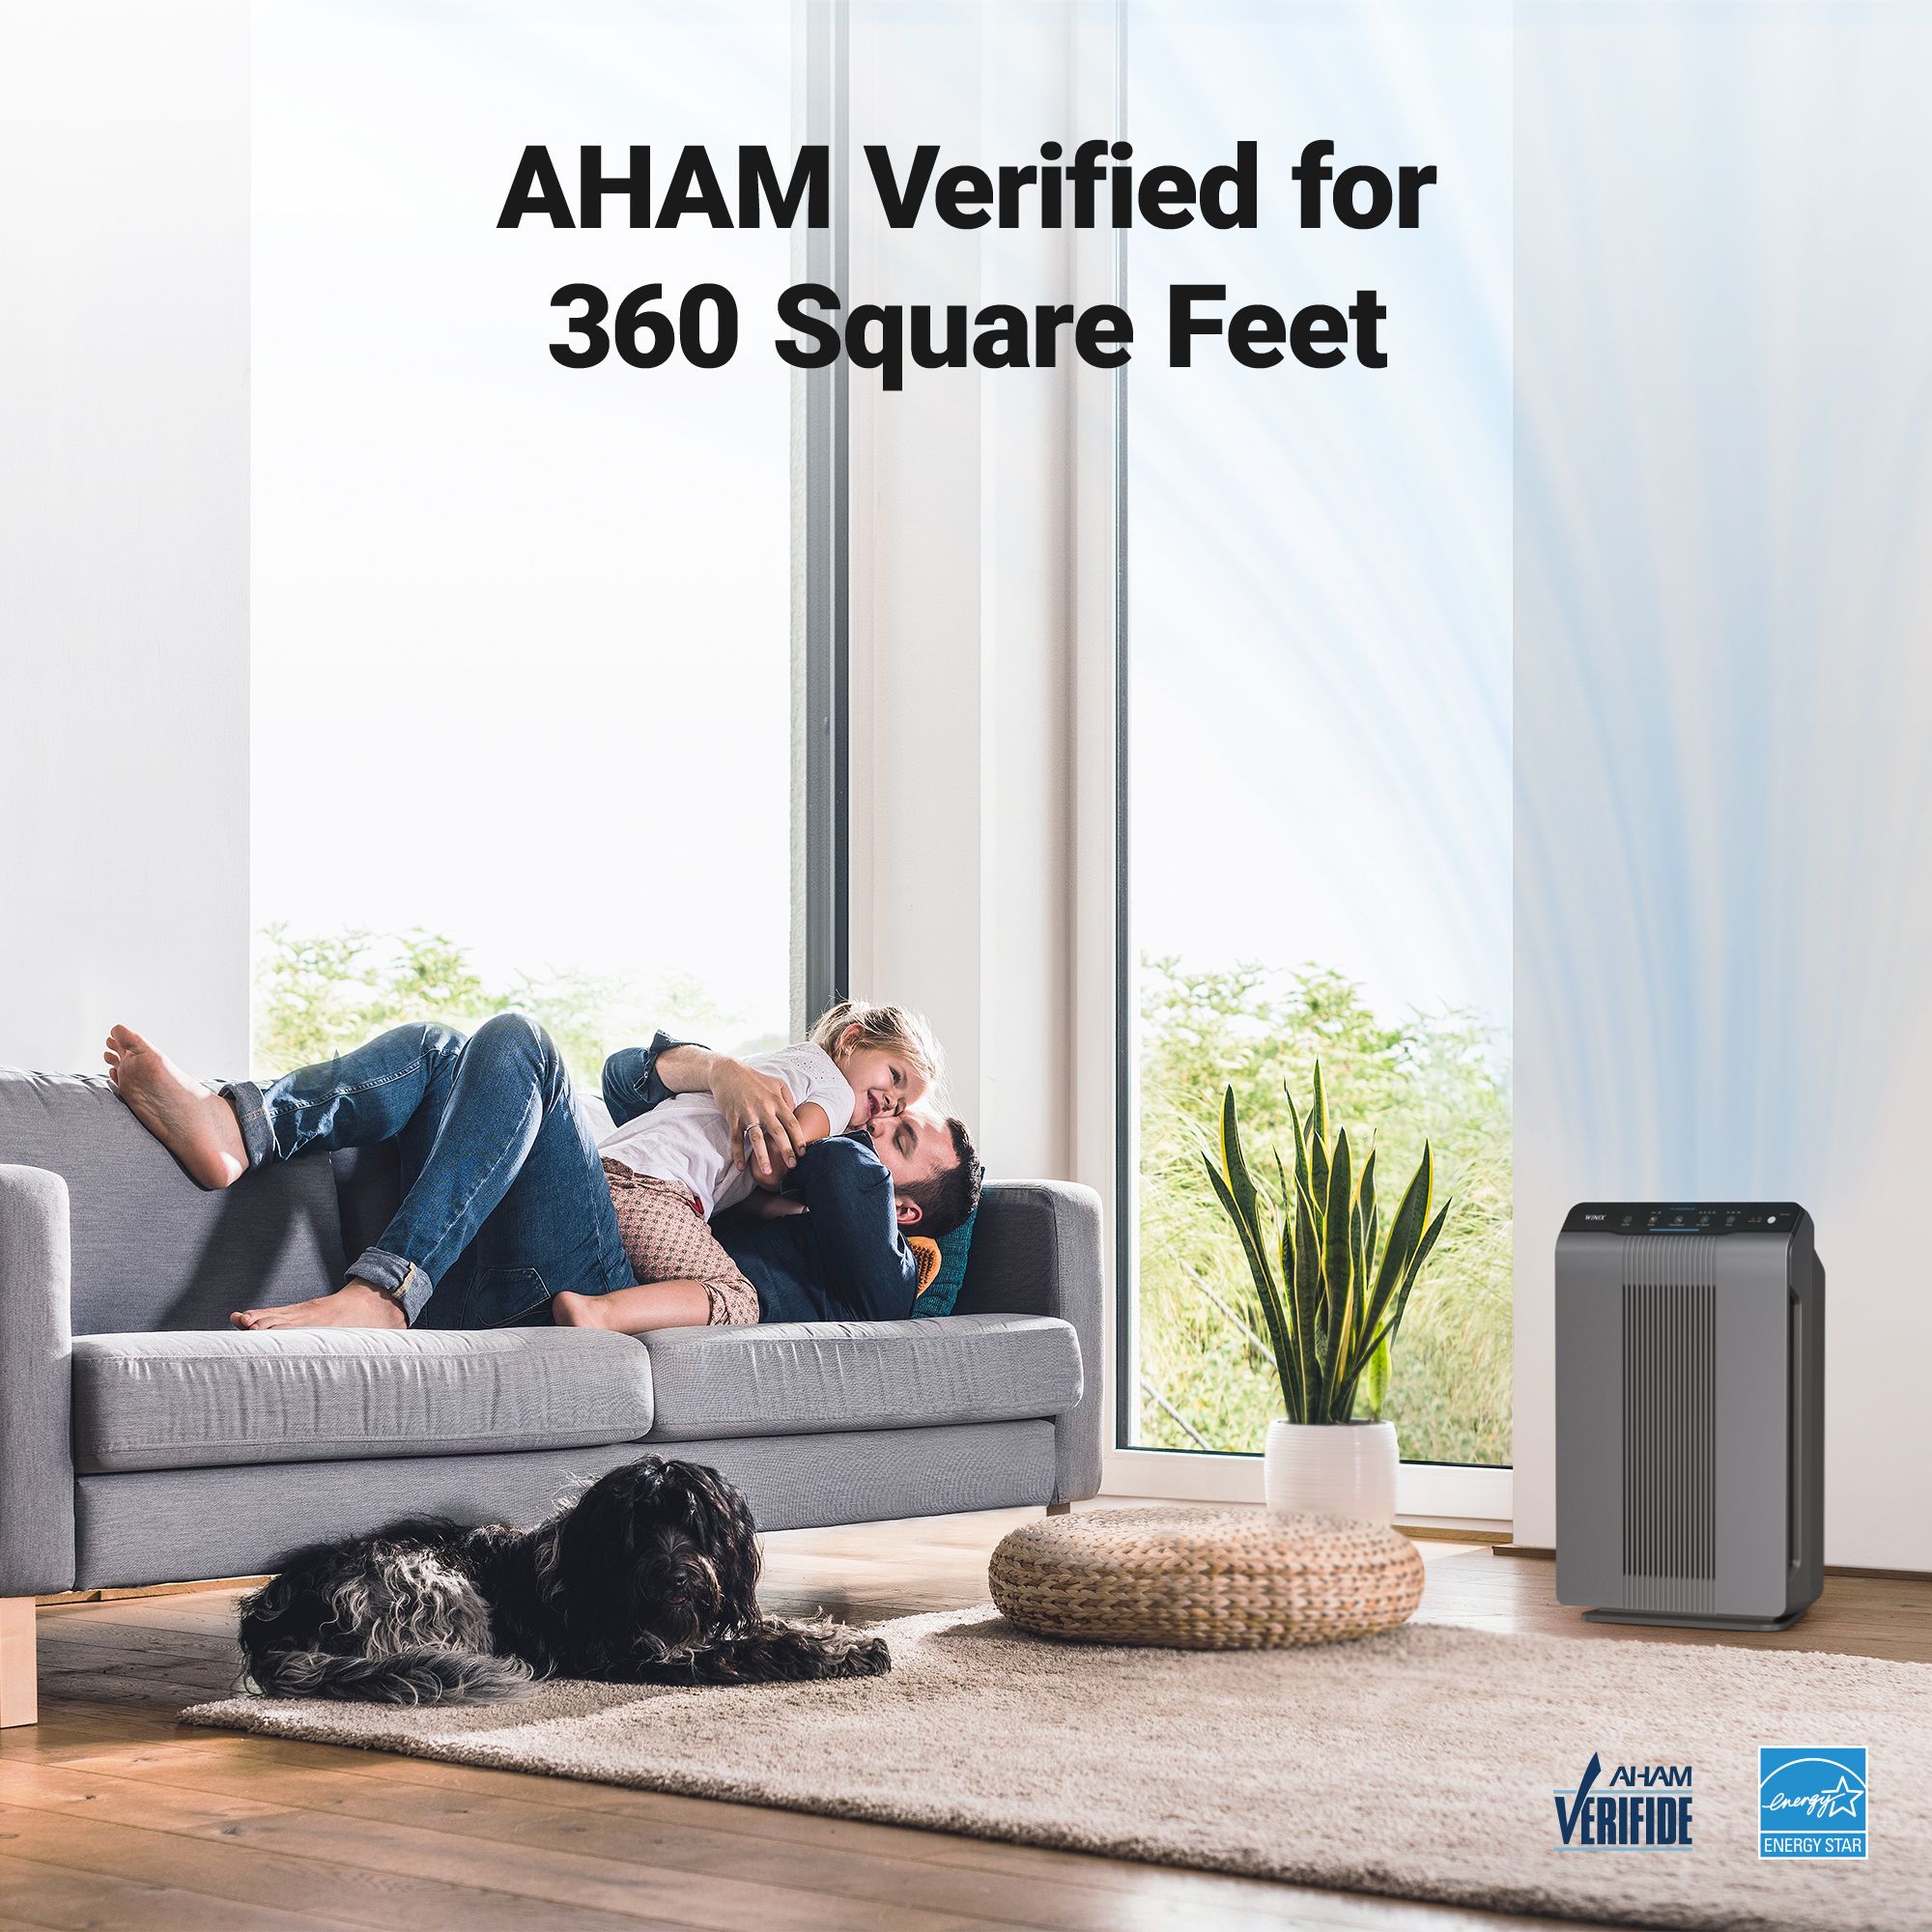 Winix 5300-2 True HEPA 4-Stage Air Purifier with PlasmaWave Technology, AHAM Verified for 5 air changes per hour for 360 square feet - image 9 of 9